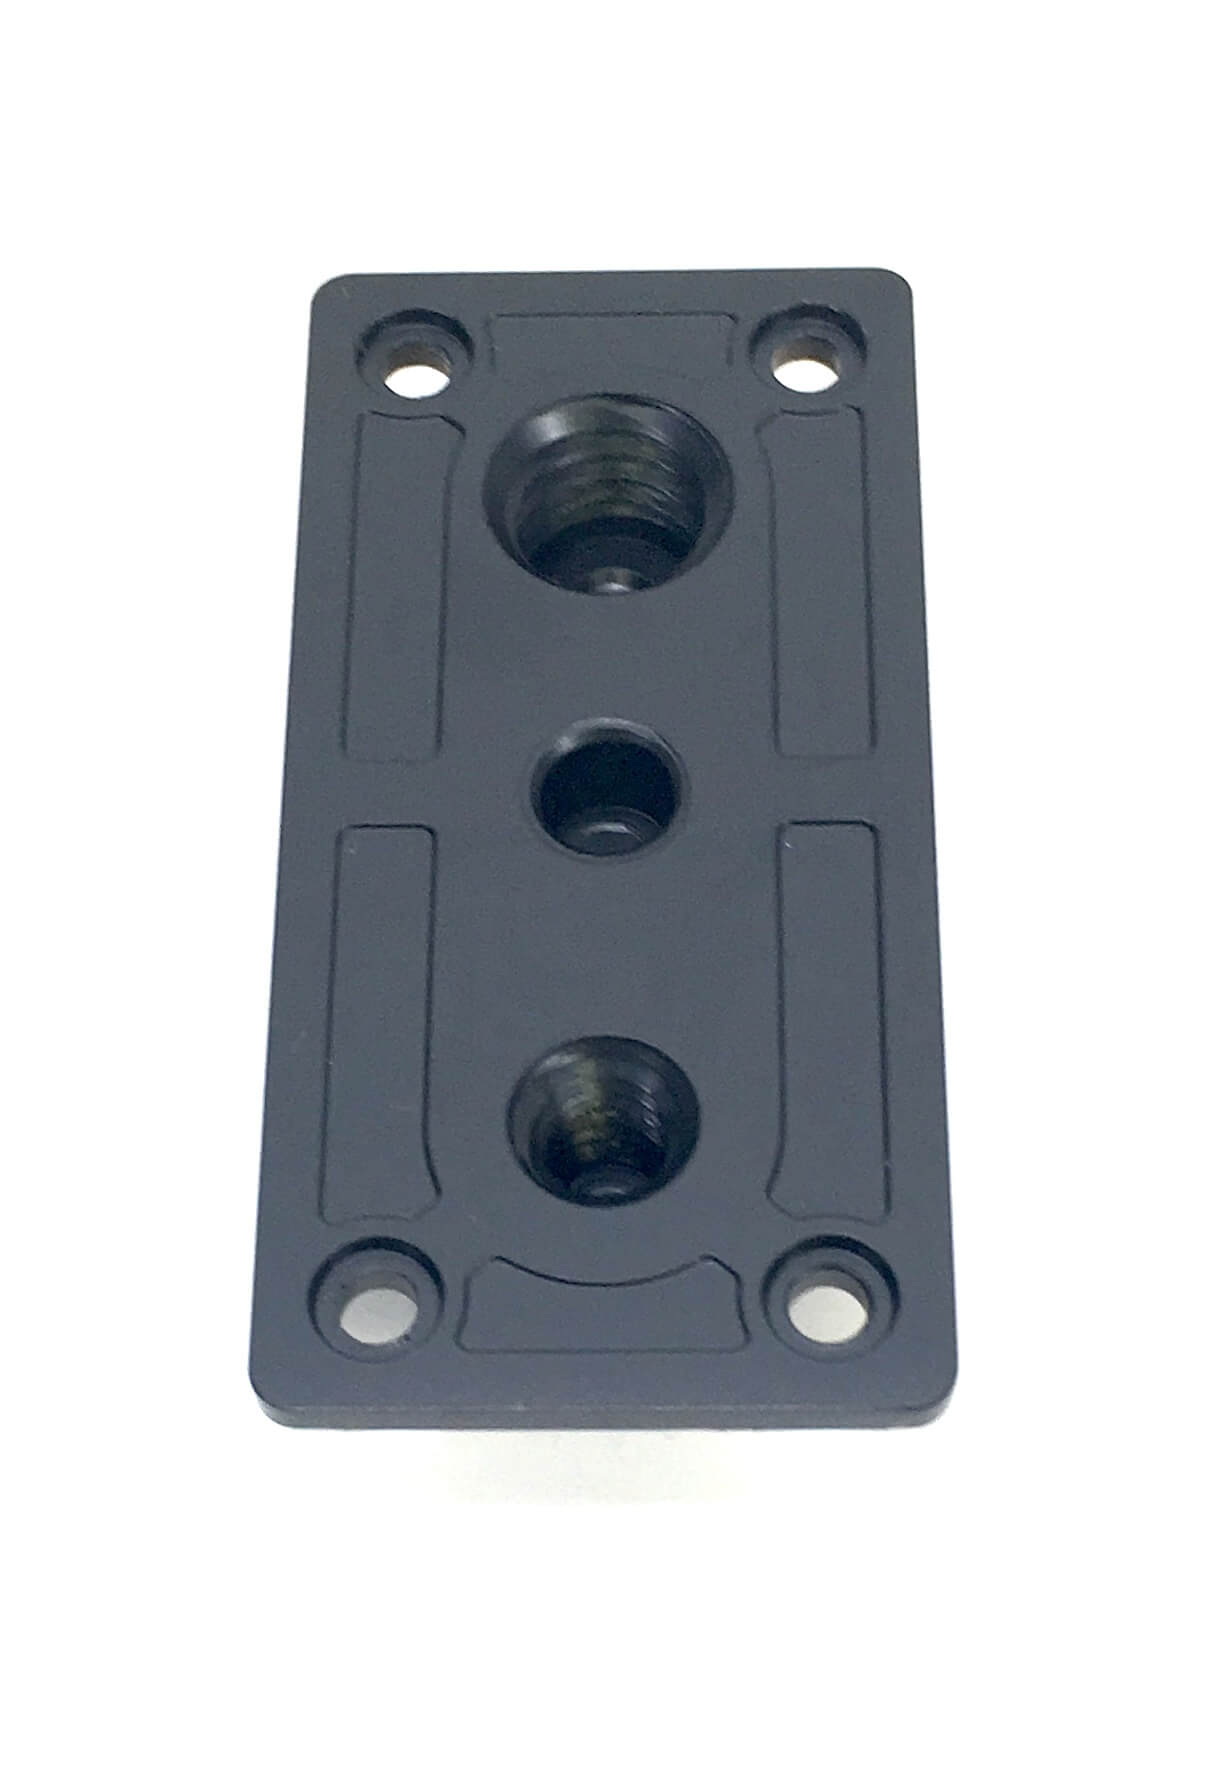 Original Tripod Mount Screw Plate that fits on the Sony PXW-FS7 camcorder. It is a genuine Sony part, sourced directly from Sony USA. Brand new factory fresh. Free Shipping.